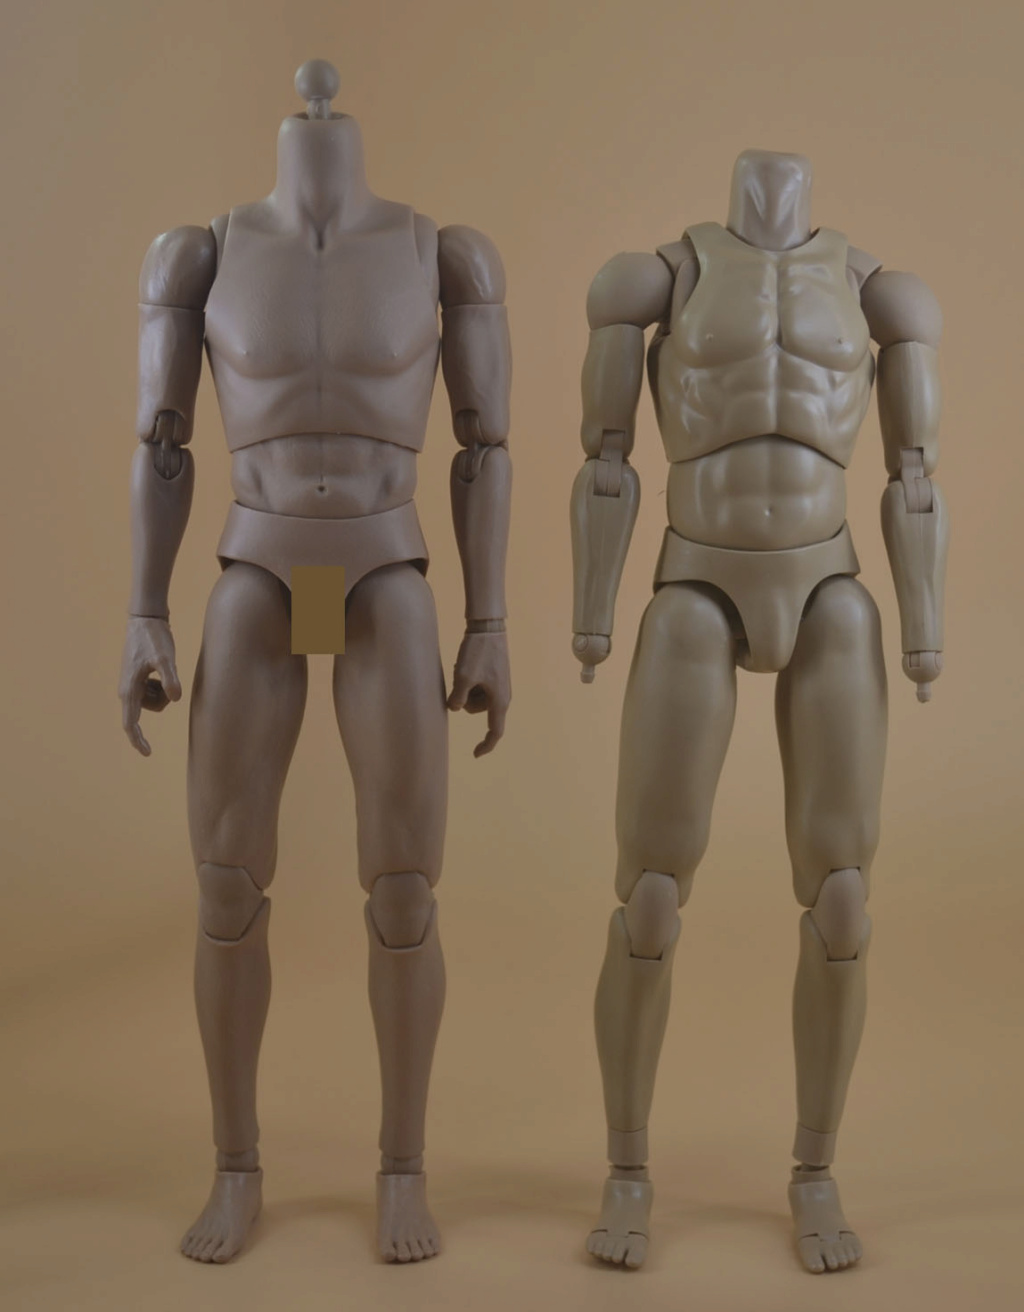 accessory - NEW PRODUCT: COOMODEL: 1/6 MB001 standard male body, MB002 tall male body, MB003 muscle male body, MB004 tall muscle body _dsc3738